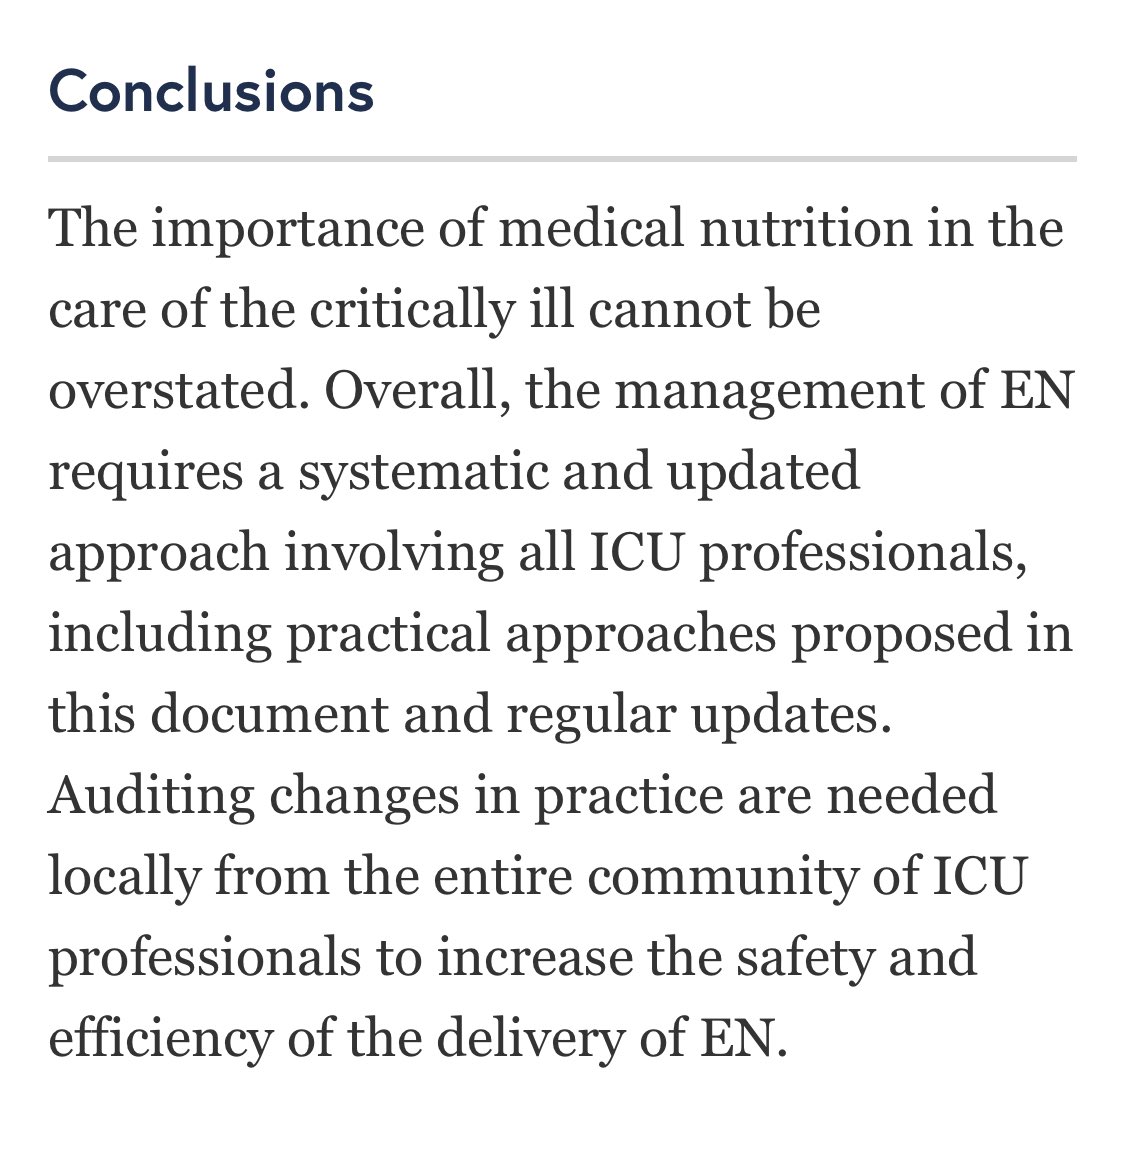 “A guide to enteral nutrition in intensive care units: 10 expert tips for the daily practice.” #ICUNutrition #FOAMcc #FOAMed #MedEd #EMCCM #andrewkibe